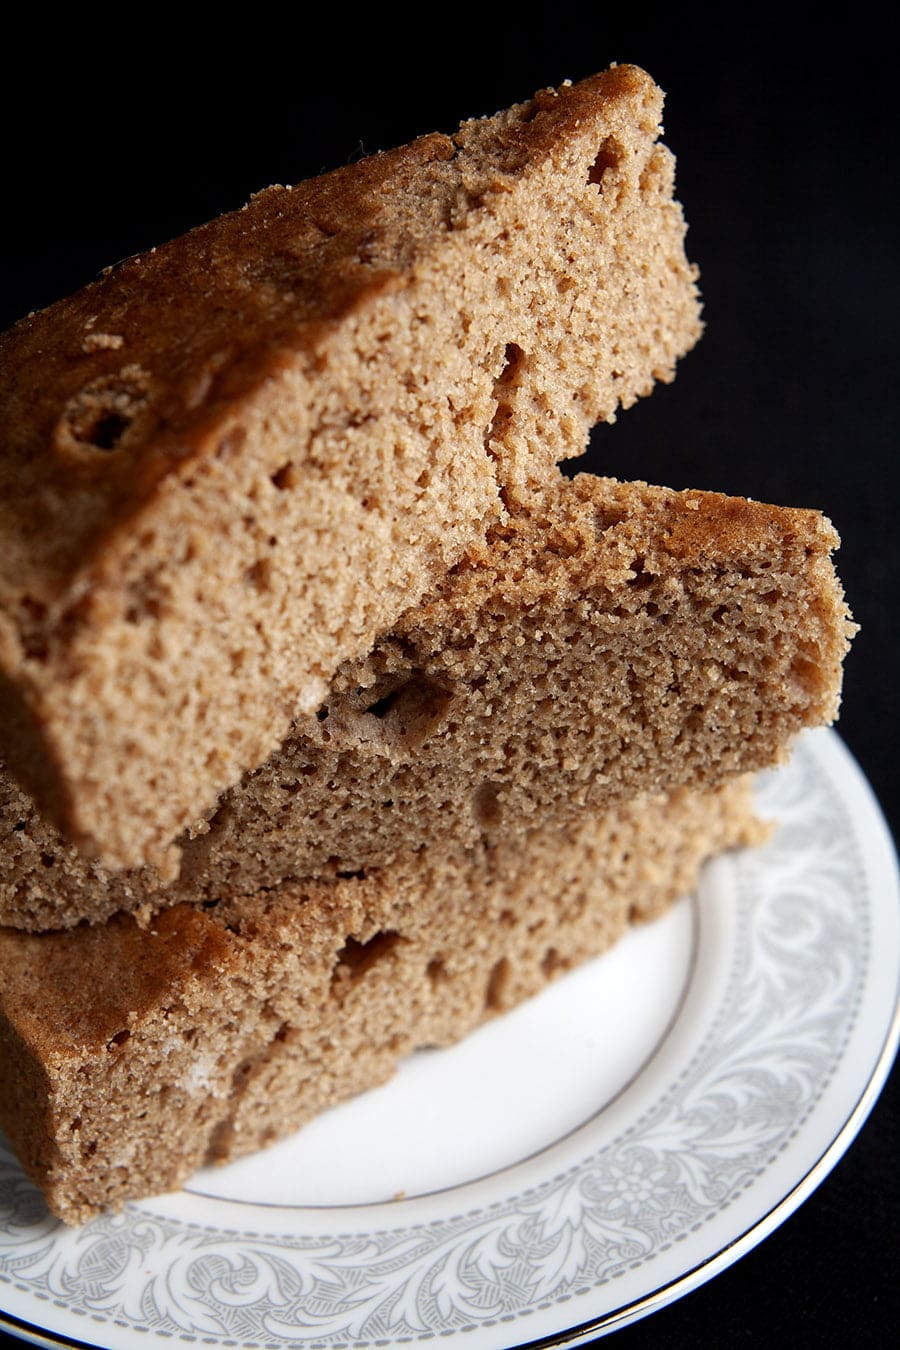 A stack of wedges of spice cake - Chai Cake